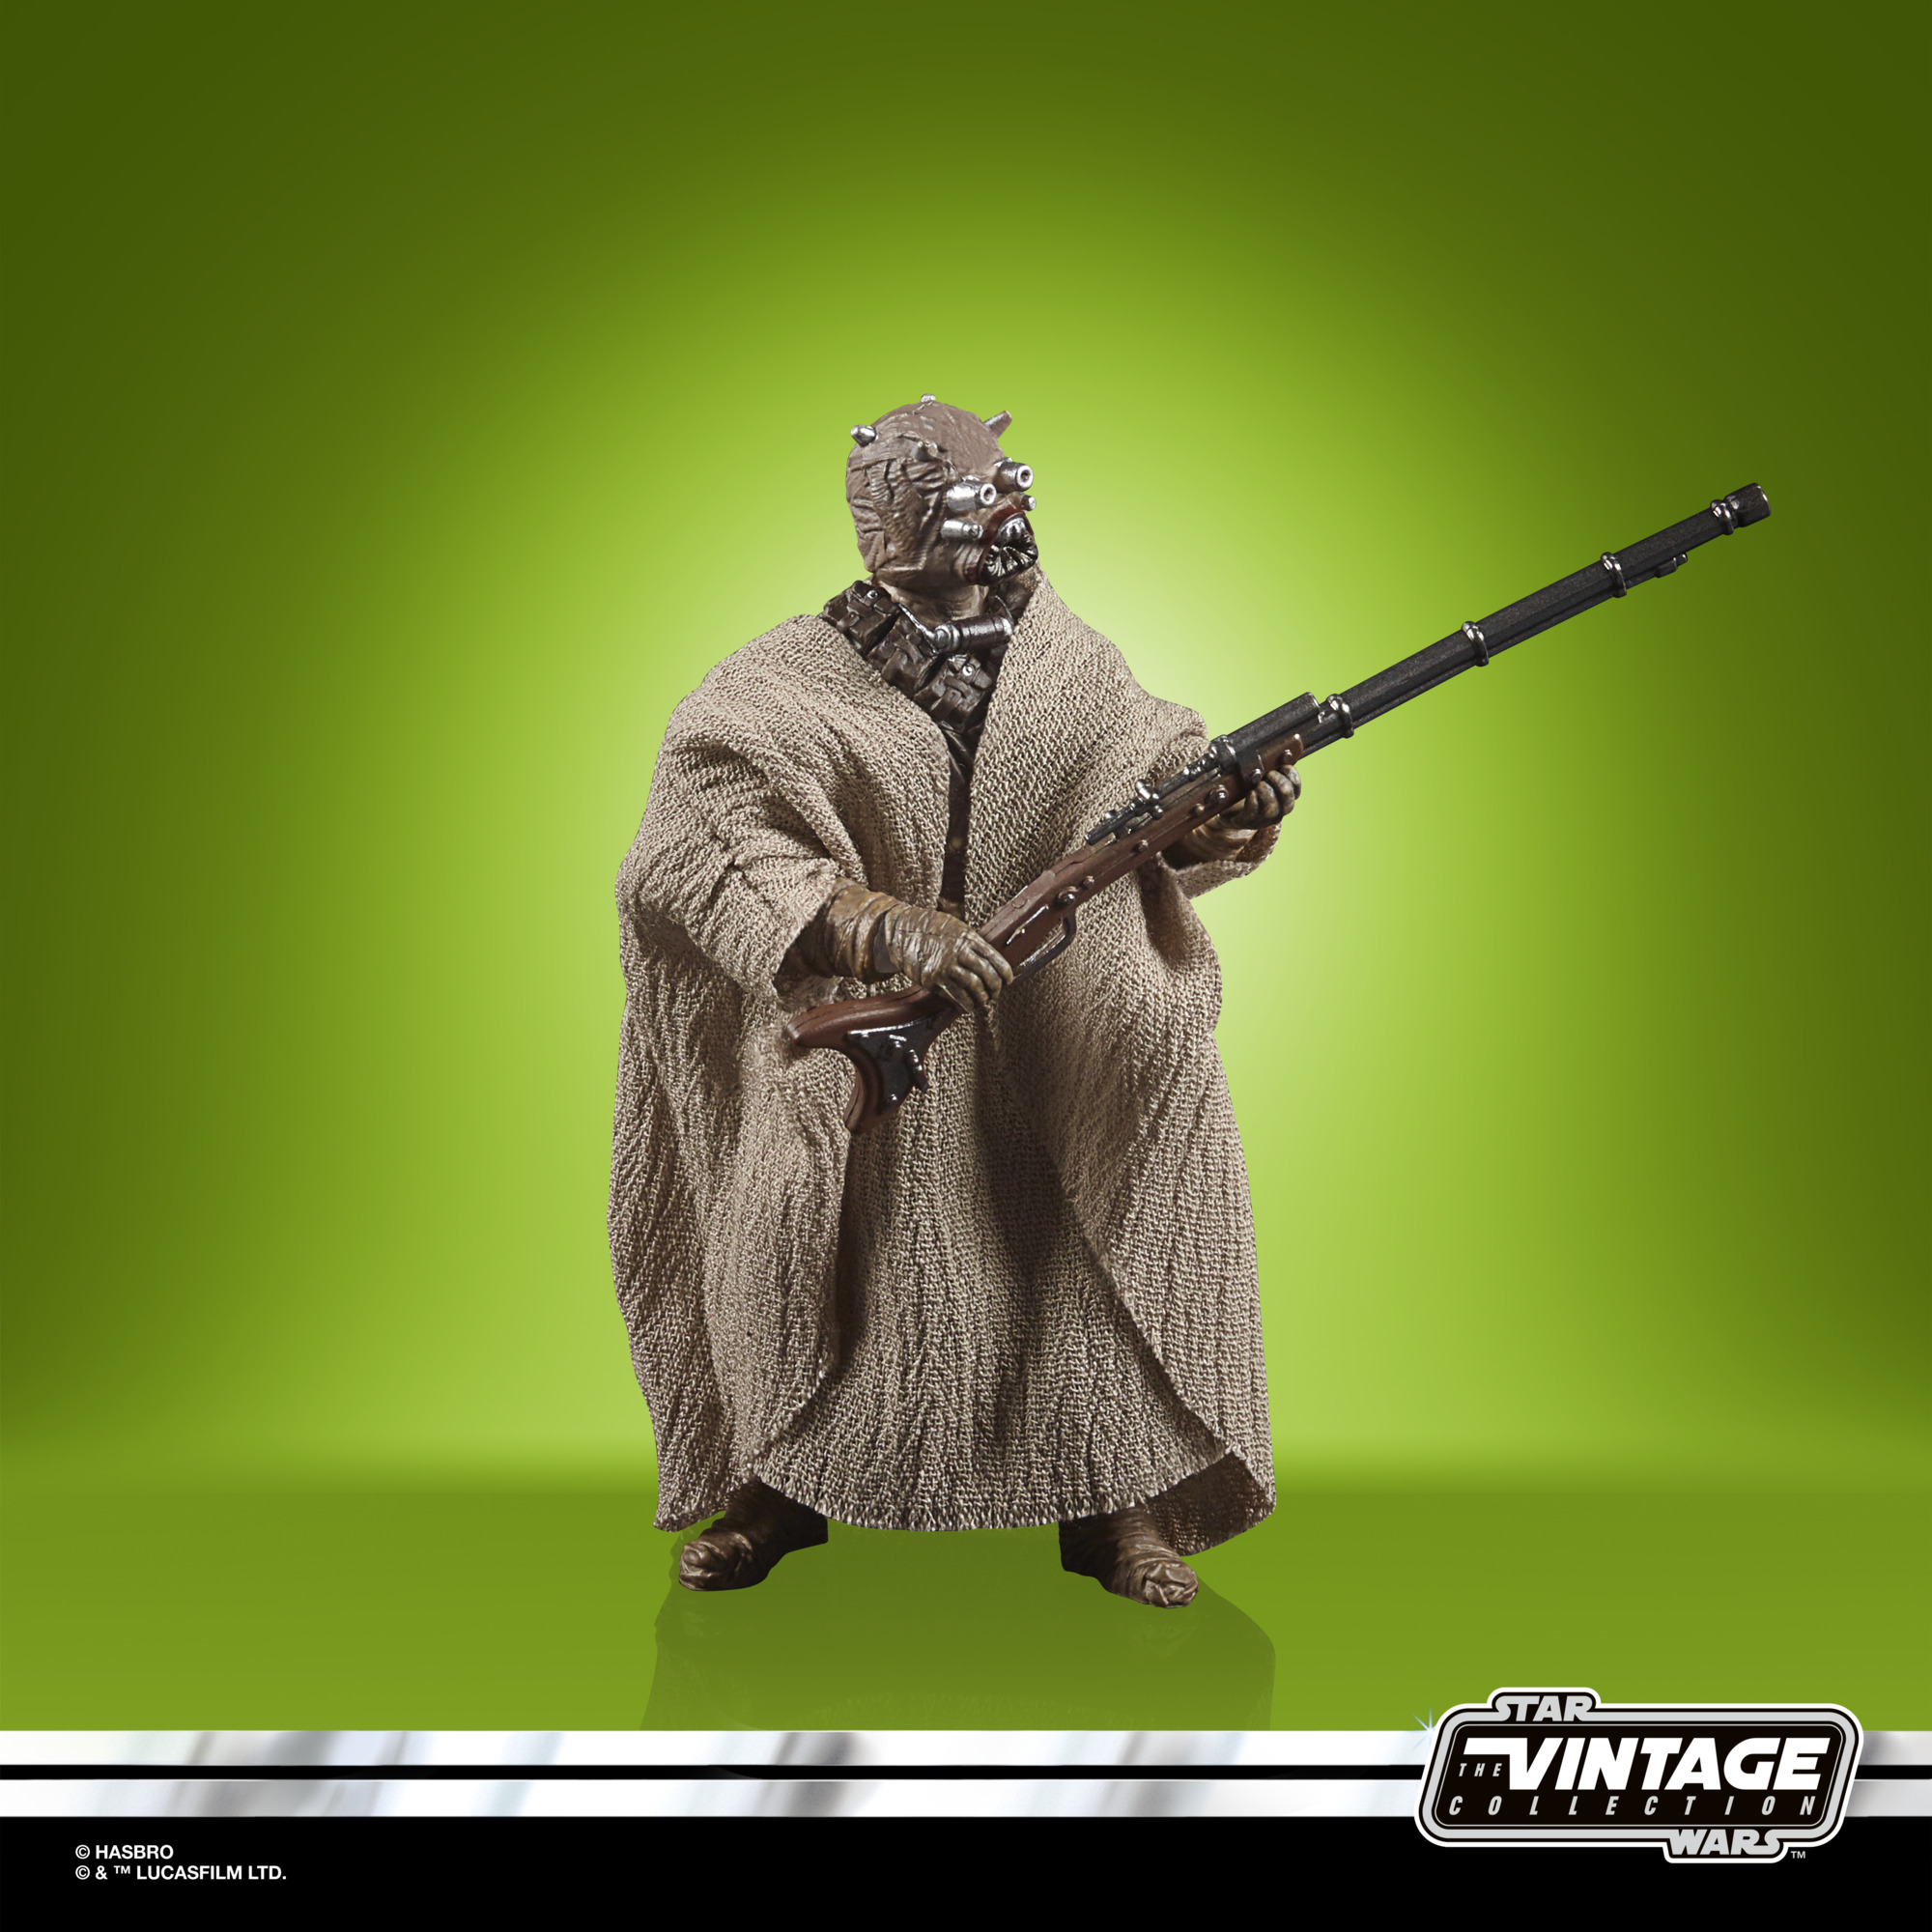 Star Wars The Vintage Collection Tusken Raider LUCASFILM 50TH ANNIVERSARY F31185L00 05010993898212